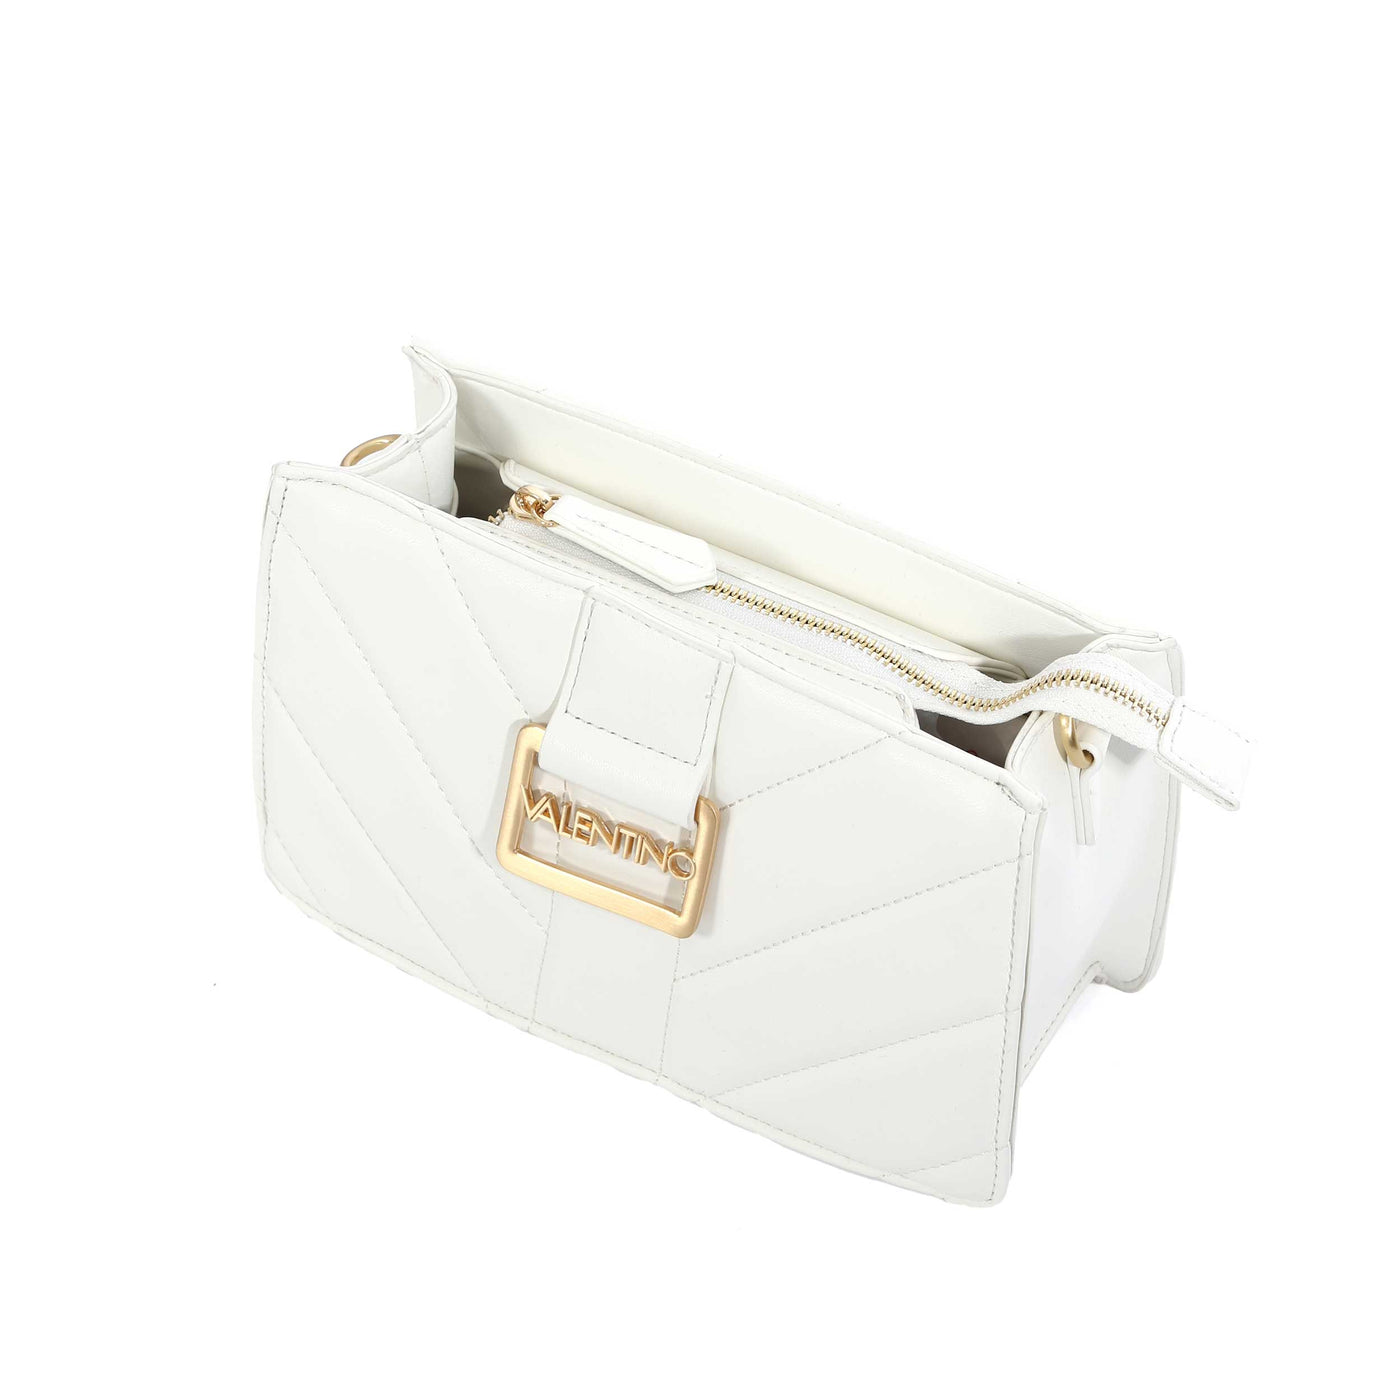 Valentino Bags Oaxaca Ladies Shoulder Bag in White Angle